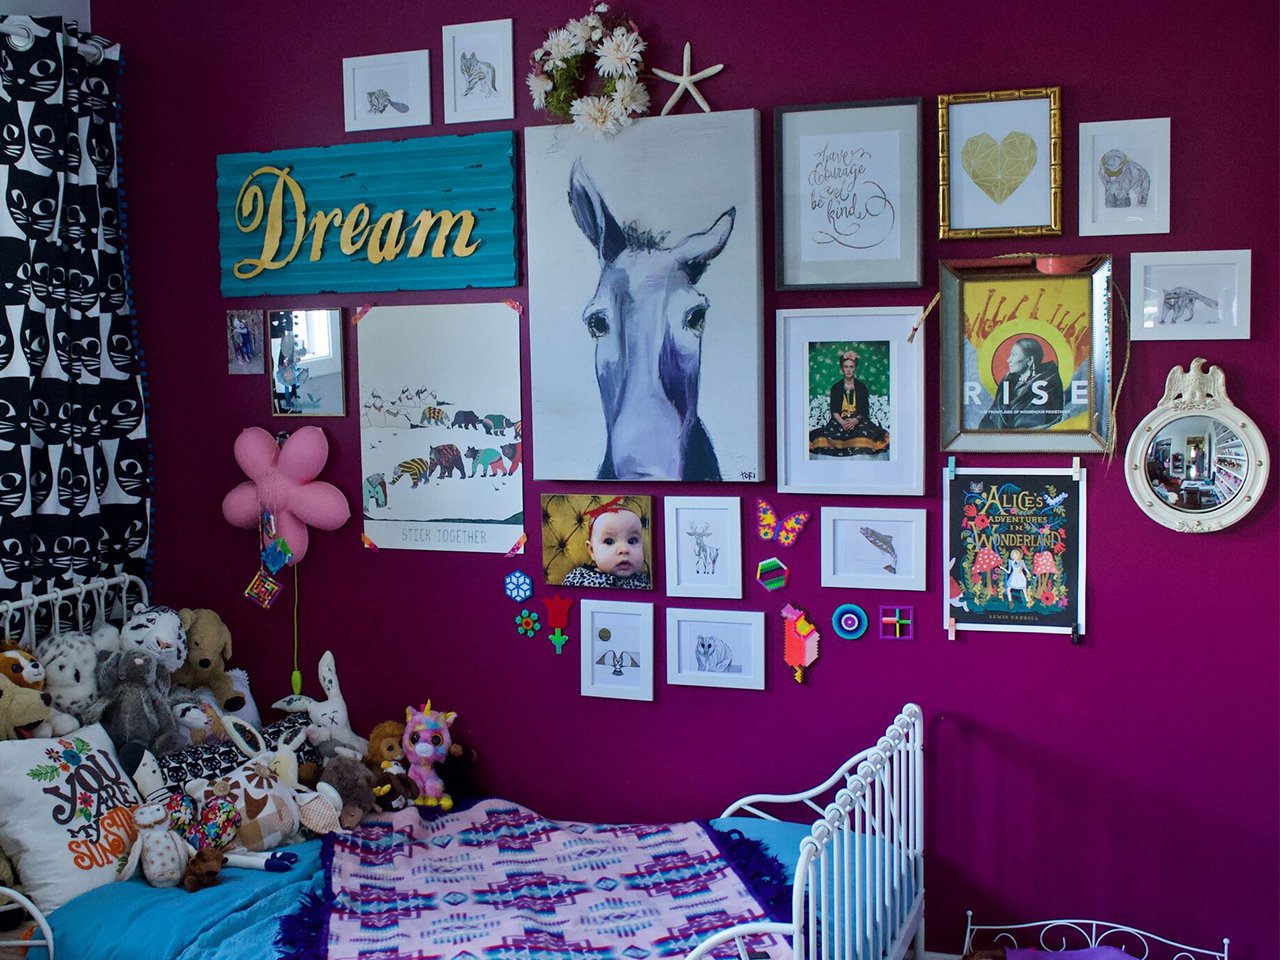 A pink bedroom decorated with an art gallery wall